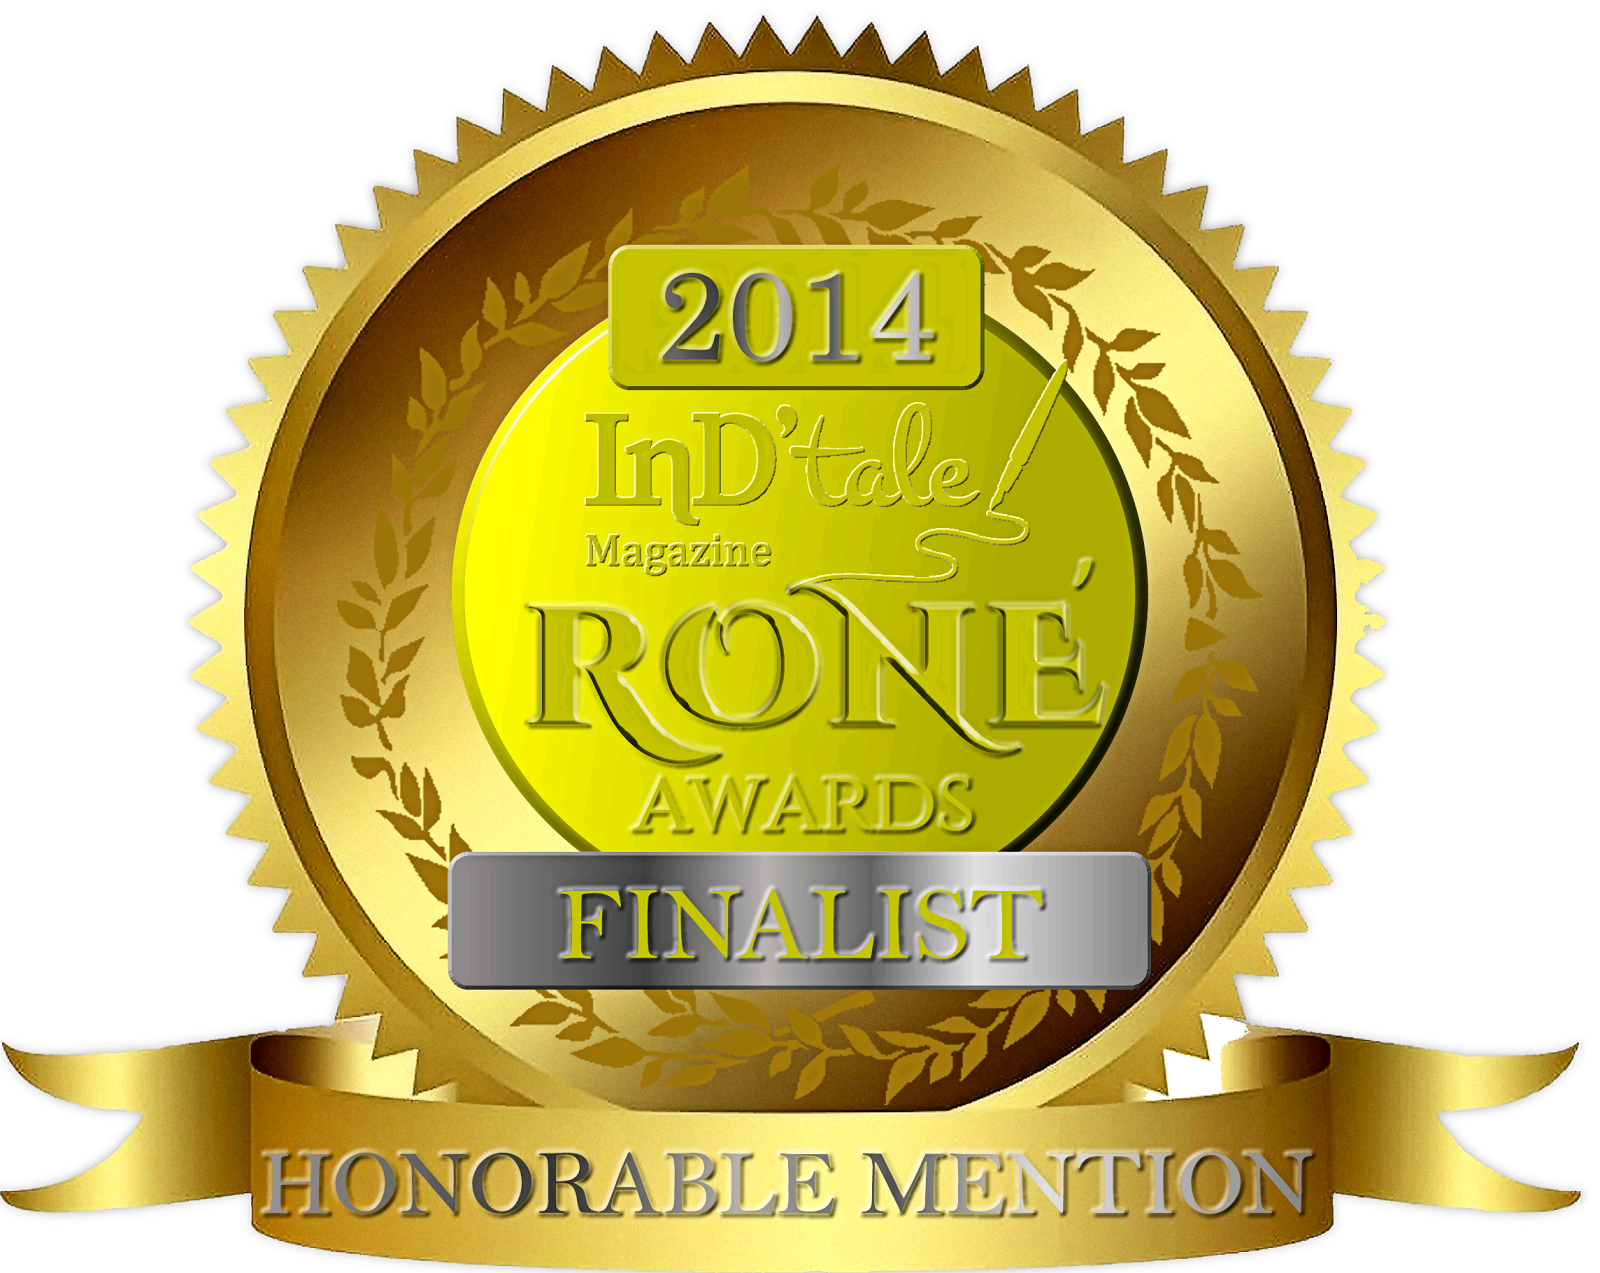 Prophecy's Child won first Honorable Mention in the 2014 R.O.N.E Awards